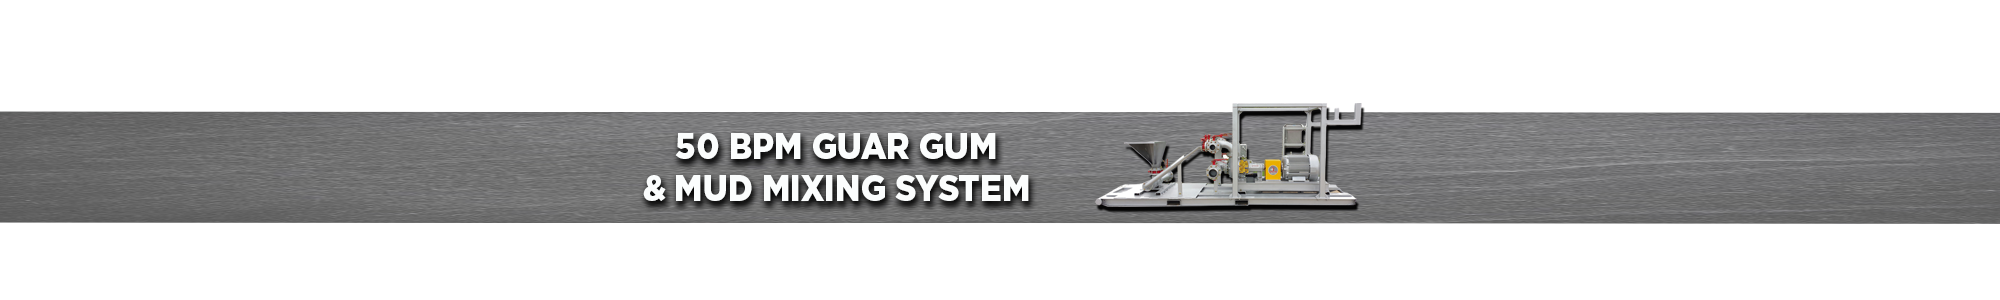 50 BPM Guar Gum and mud mixing system